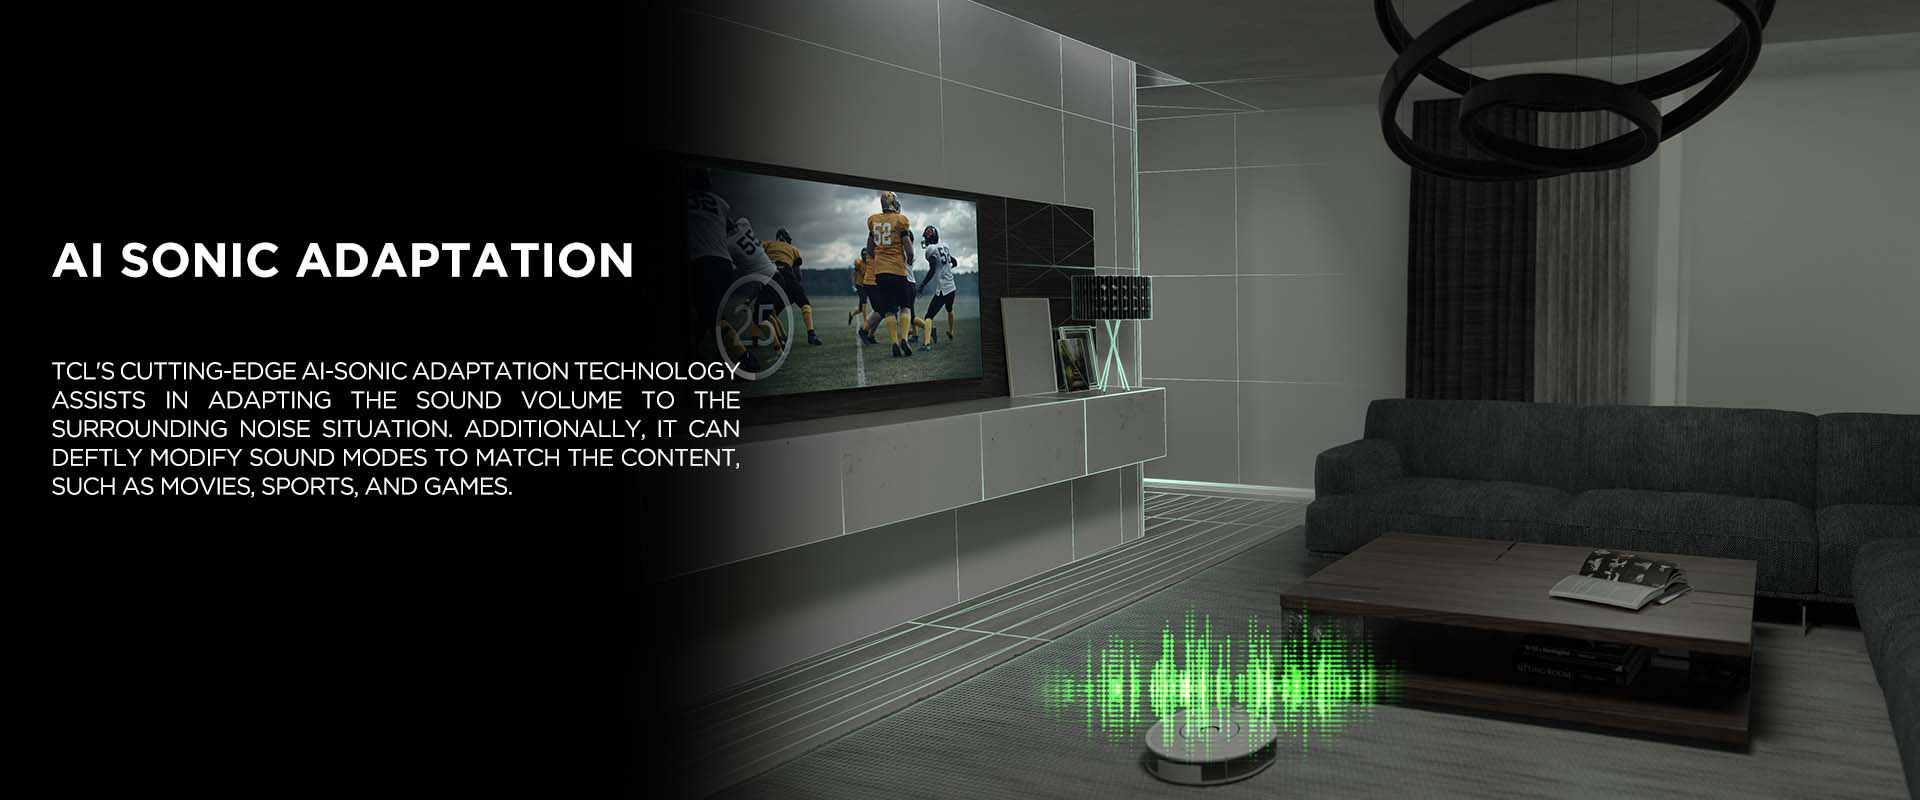 AI SONIC ADAPTATION - TCL's cutting-edge Ai-Sonic Adaptation technology assists in adapting the sound volume to the surrounding noise situation. Additionally, it can deftly modify sound modes to match the content, such as movies, sports, and games.